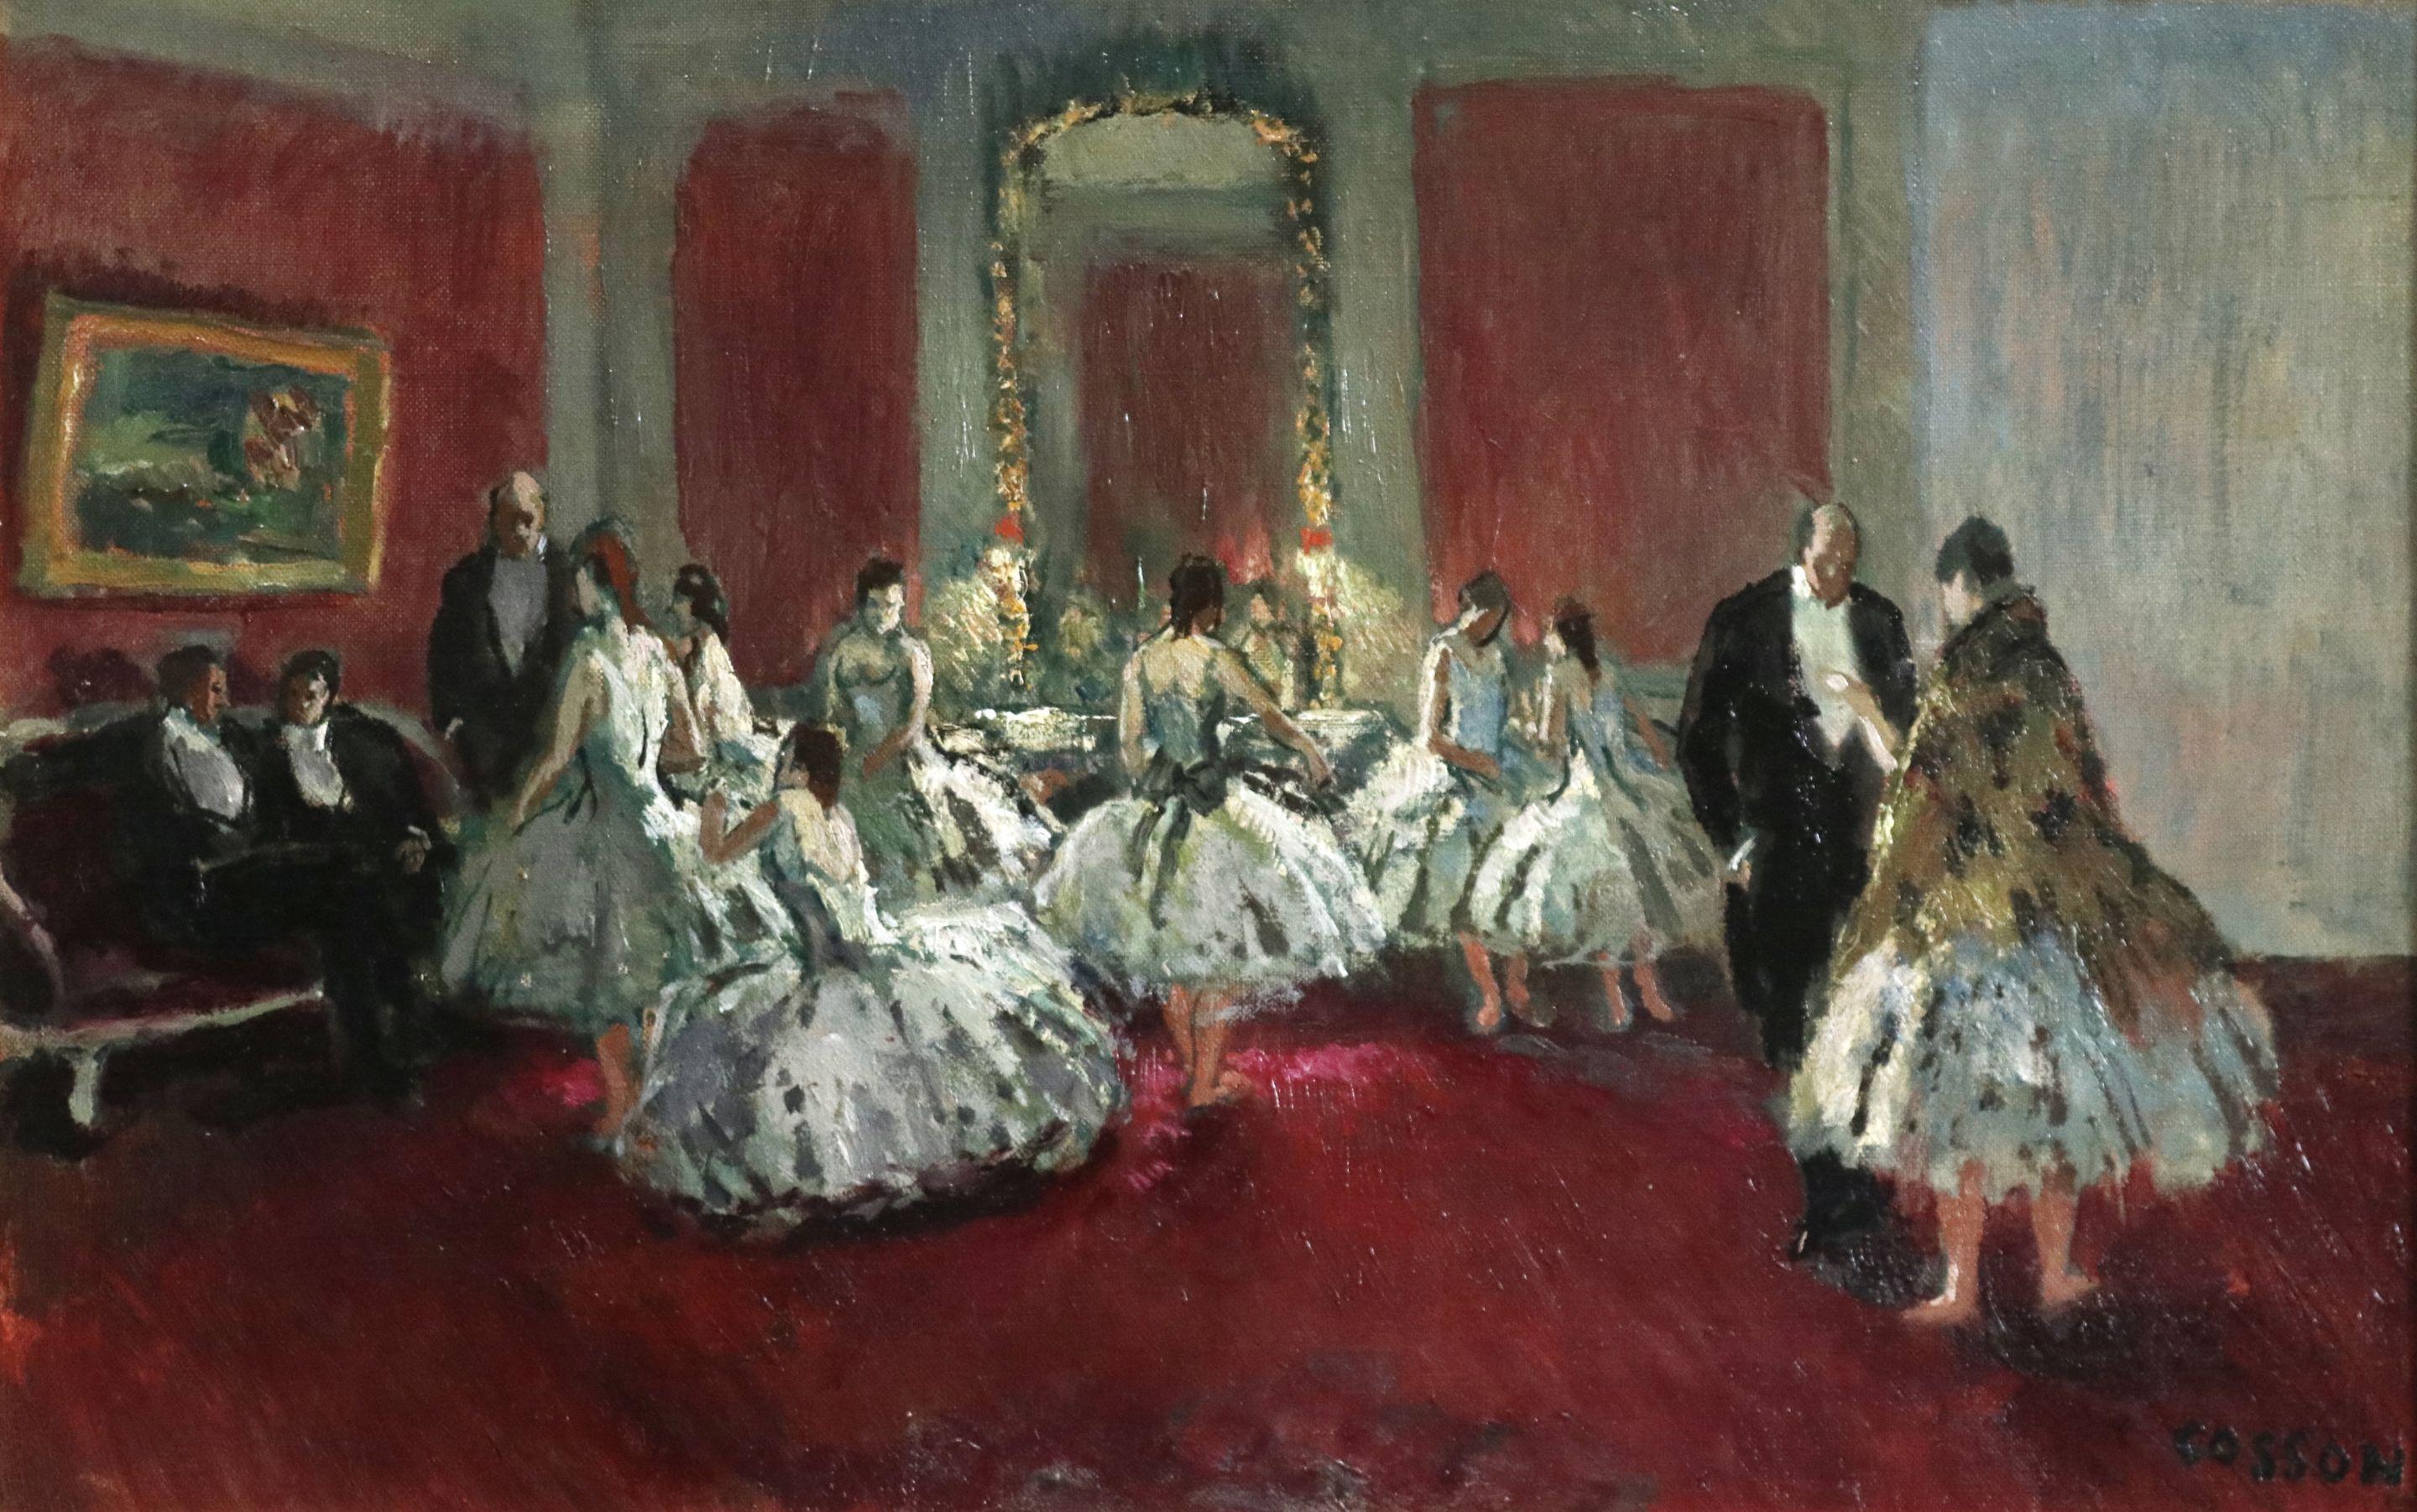 Danseuse - 20th Century Oil, Ballet Dancers in Interior by Marcel Cosson - Painting by Jean-Louis-Marcel Cosson